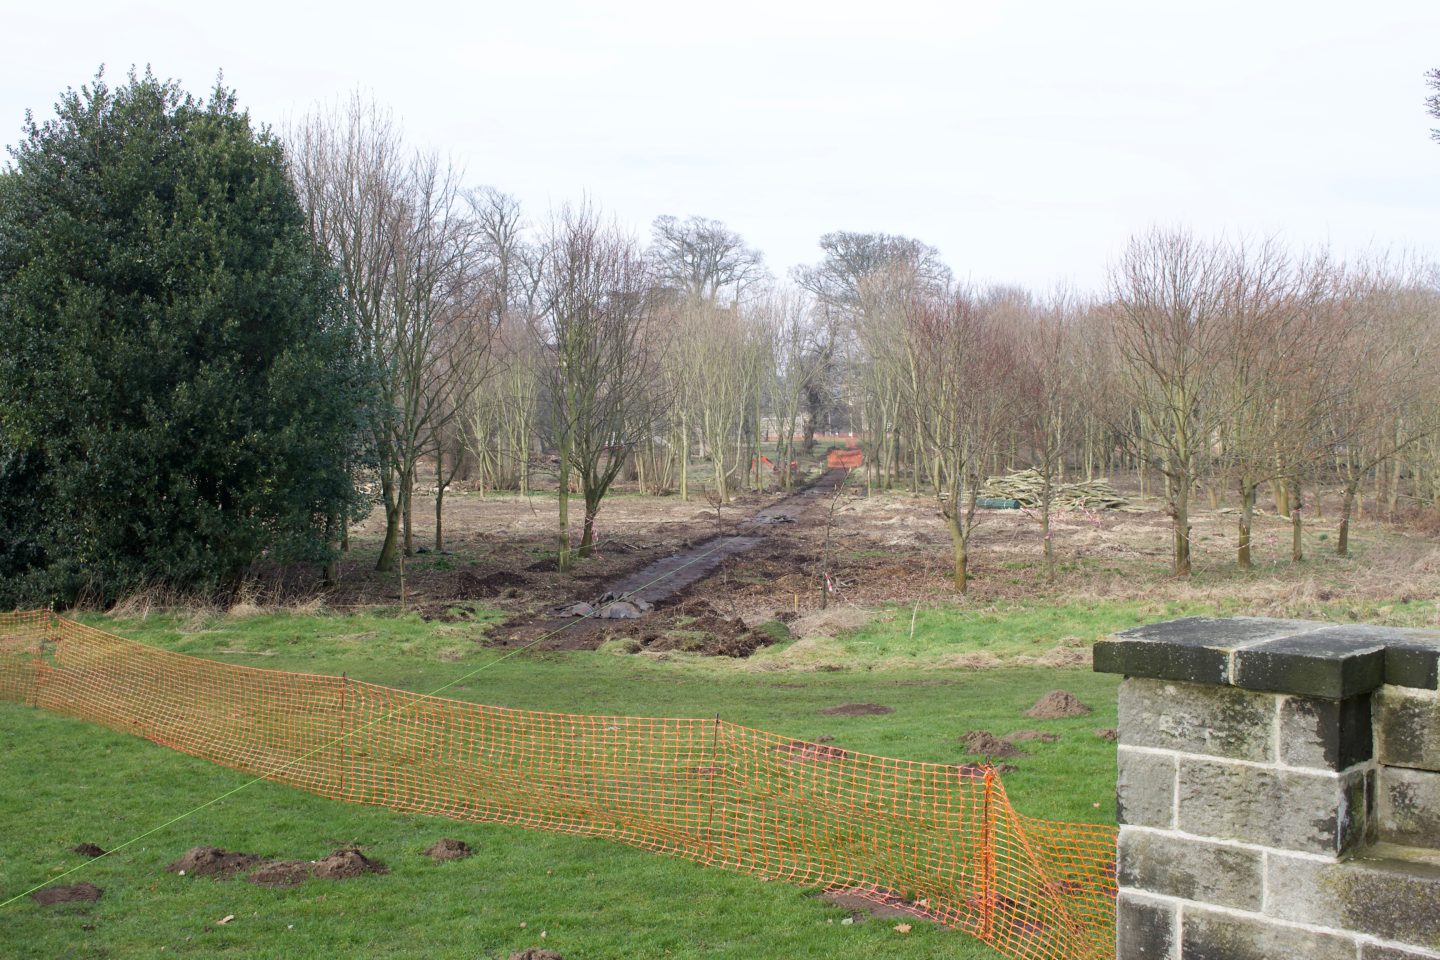 AD: Seaton Delaval Hall is under construction - what to expect...